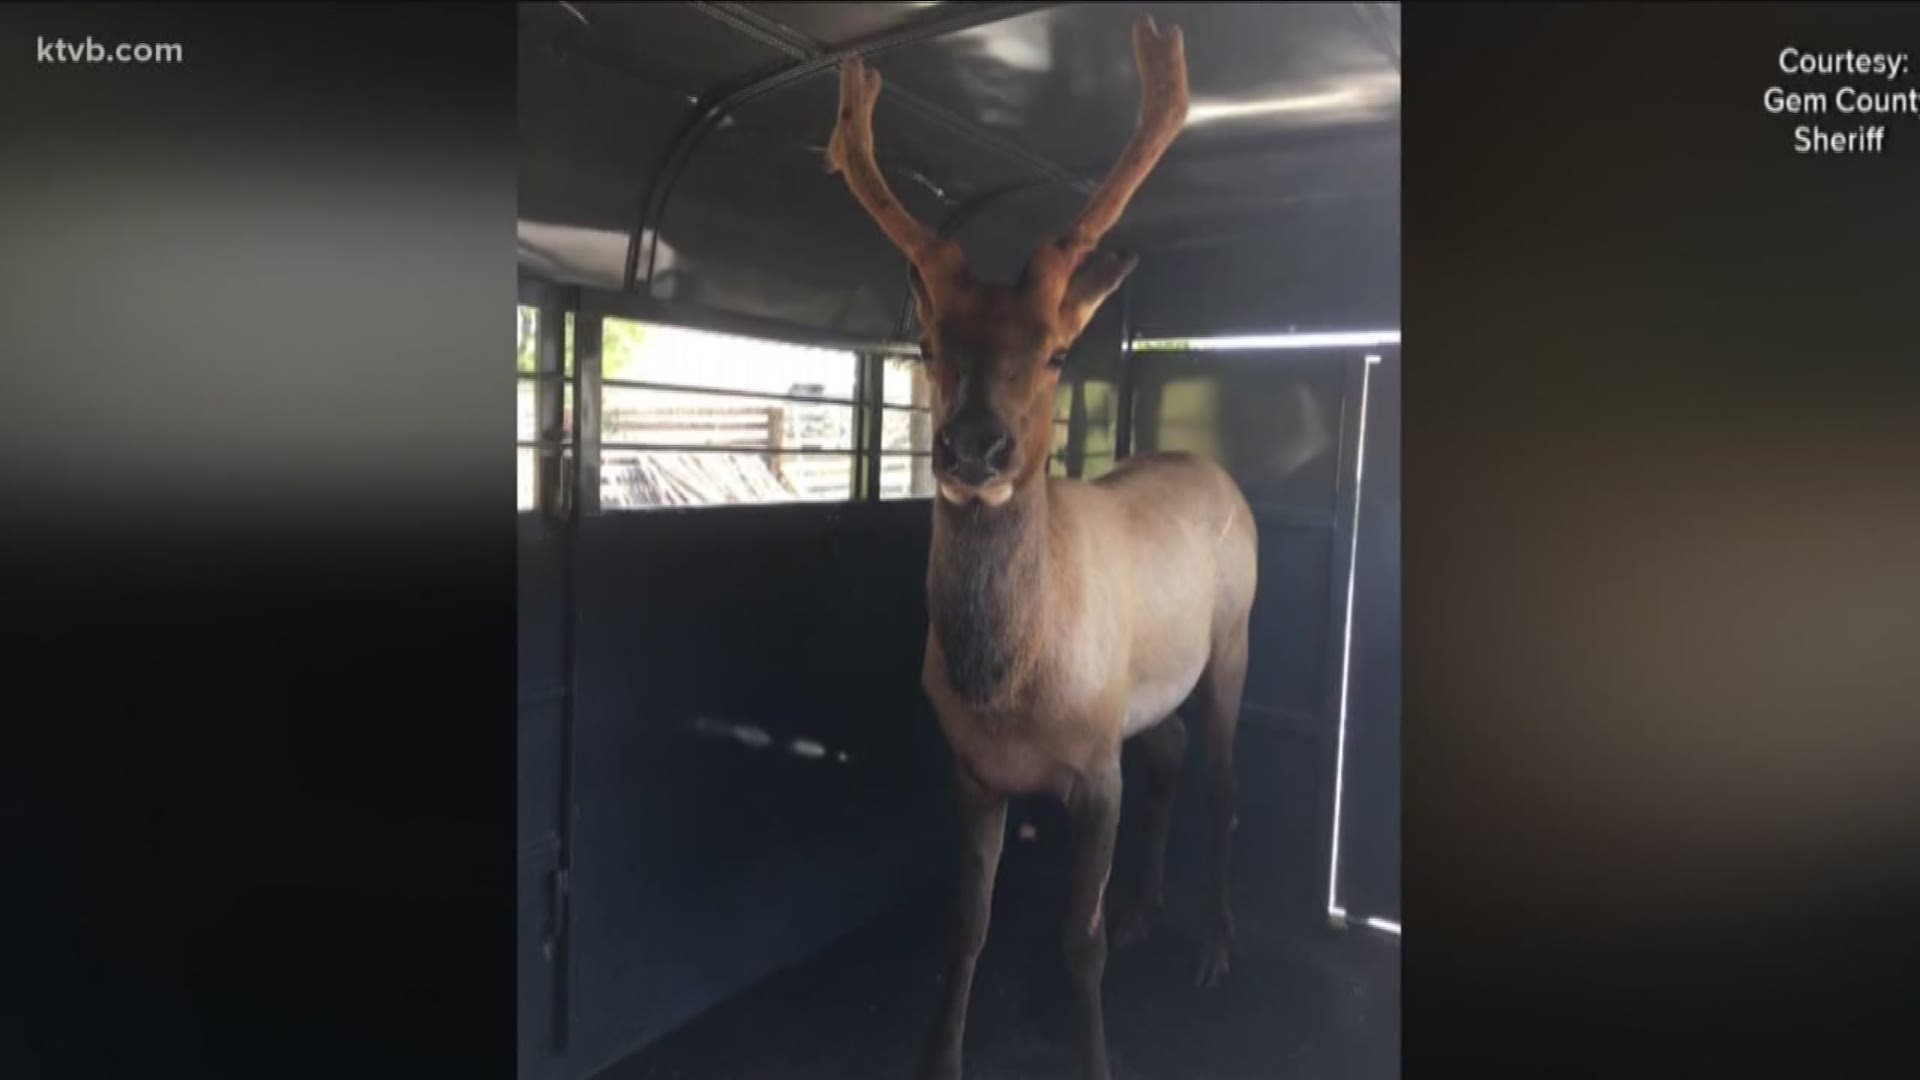 On Sunday, Idaho Fish and Game announced that "Elliot the Elk" is back in captivity and is waiting to be transported to an accredited facility to take care of him. Fish and Game officers found the young bull less than three miles from where he was originally released at, according to Evin Oneale, a spokesperson for Idaho Fish and Game.